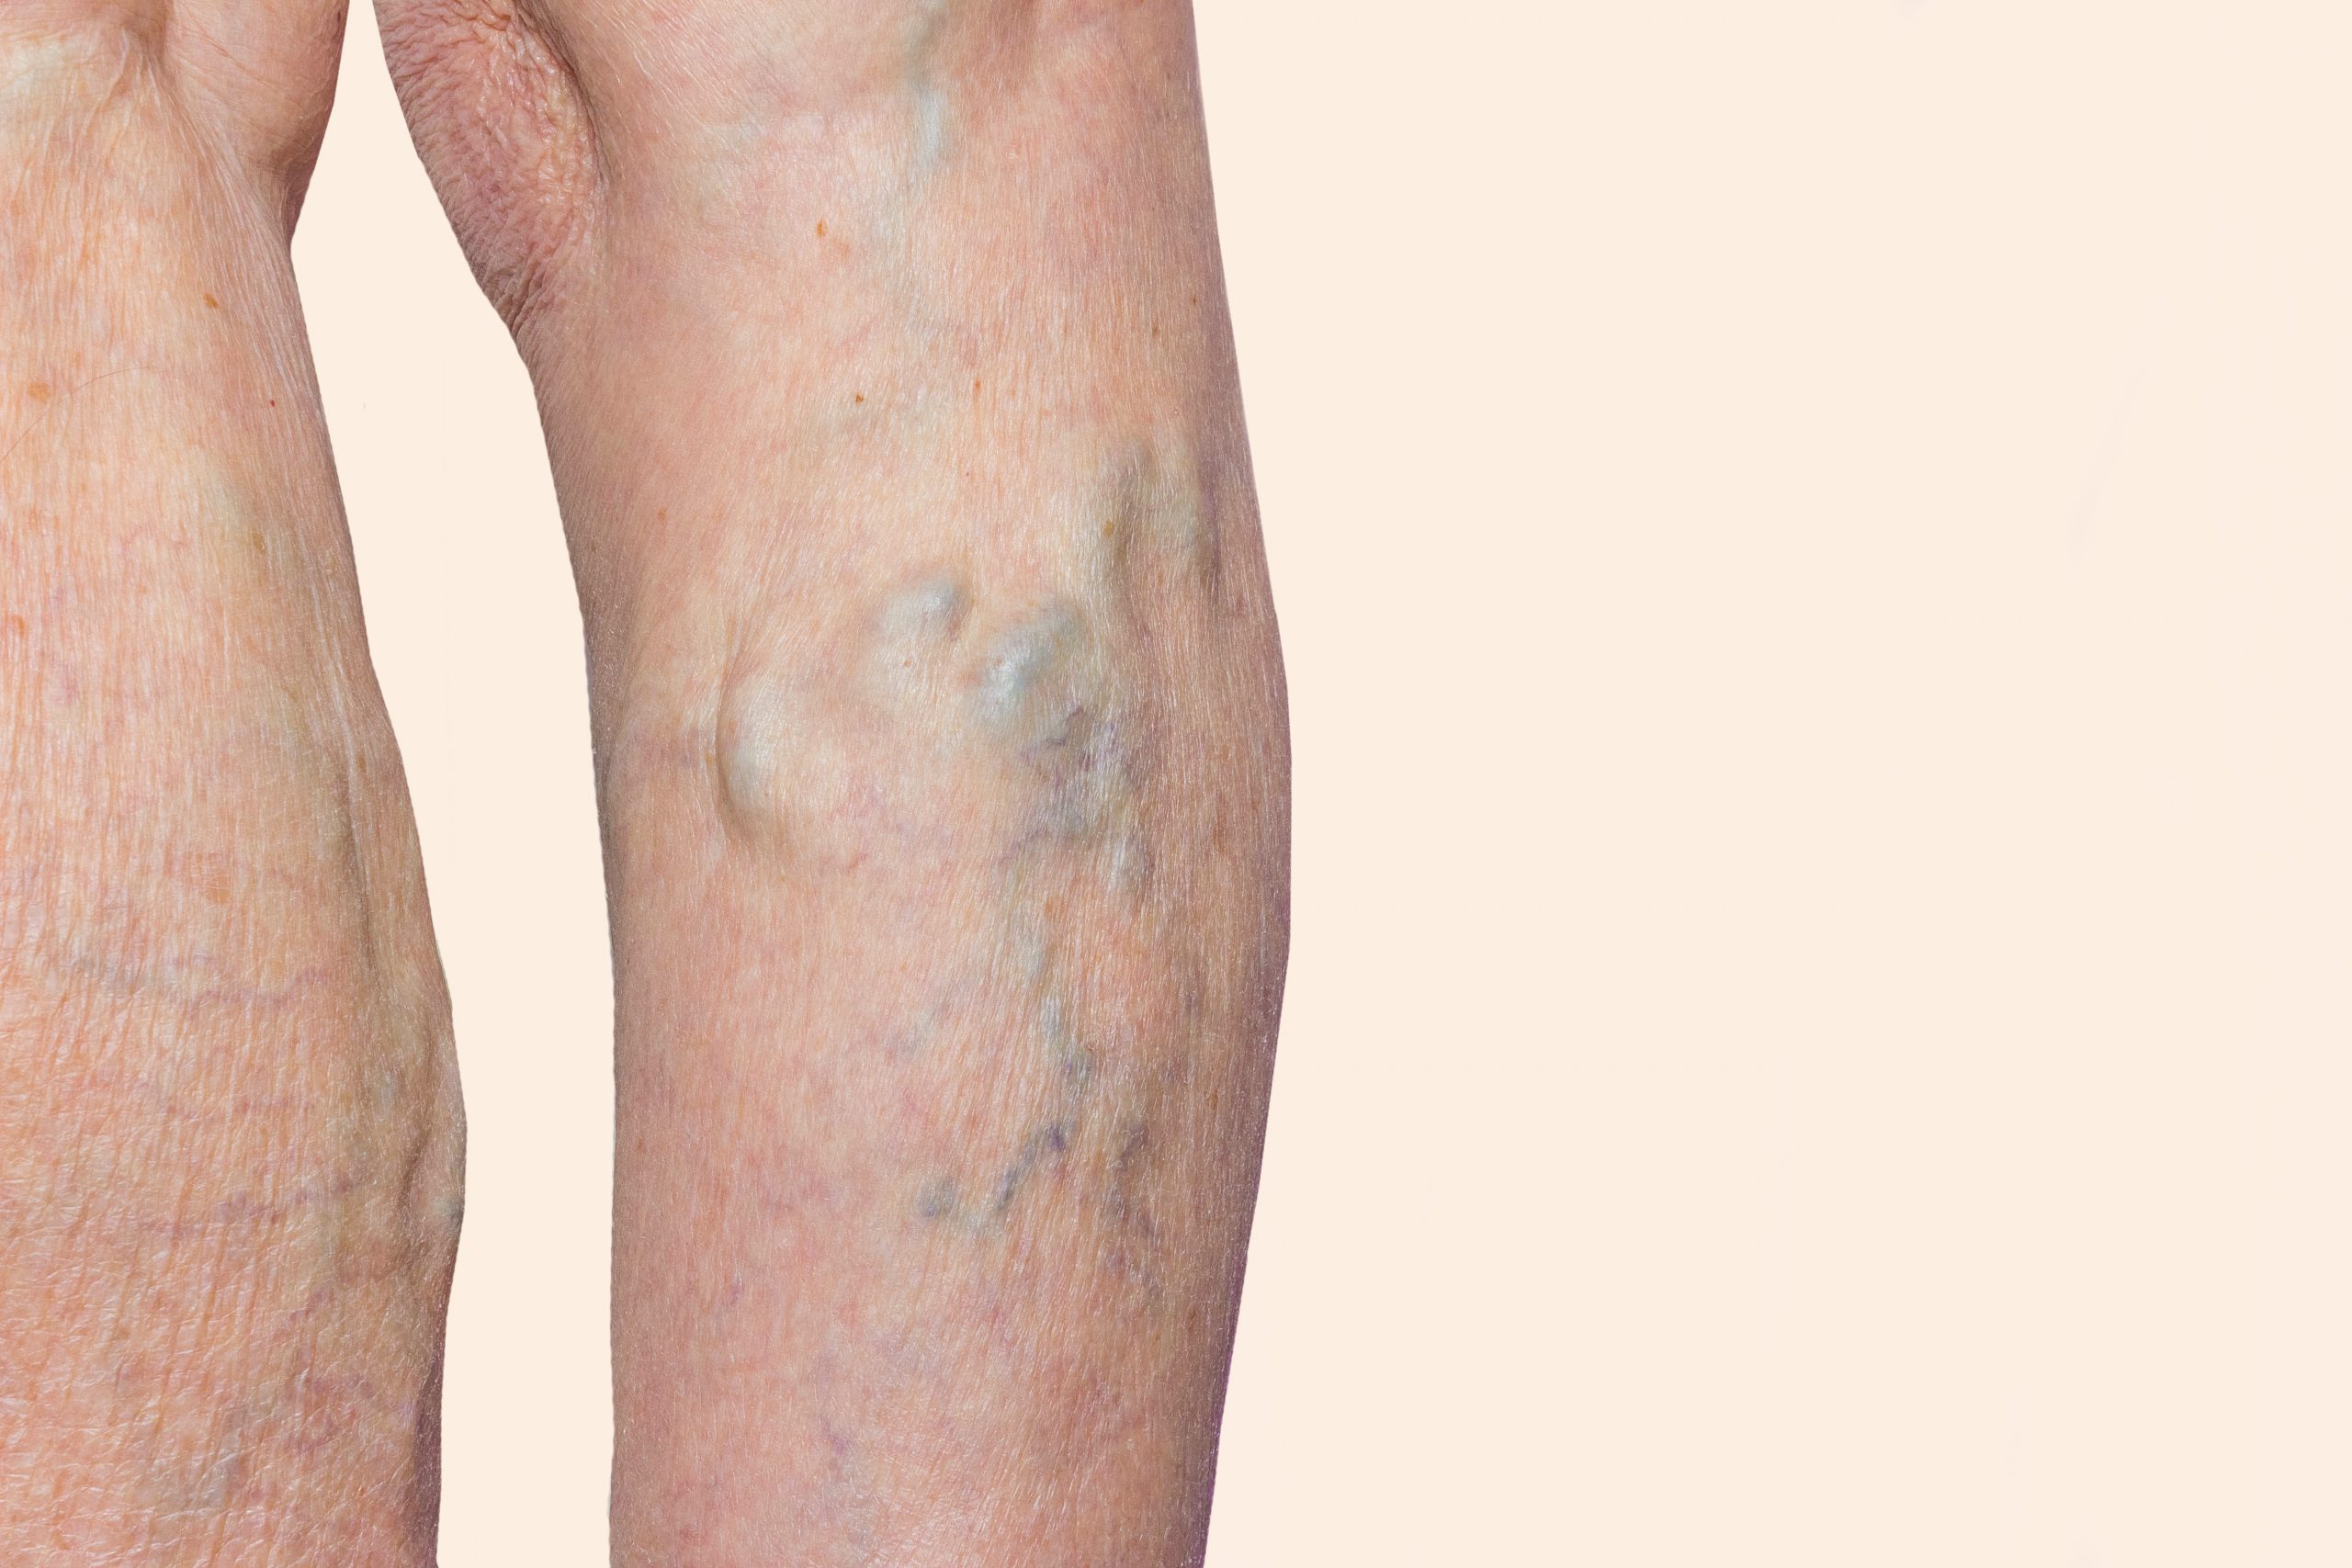 Copy-of-Varicose-Veins-on-Leg-shutterstock_1035063316-scaled